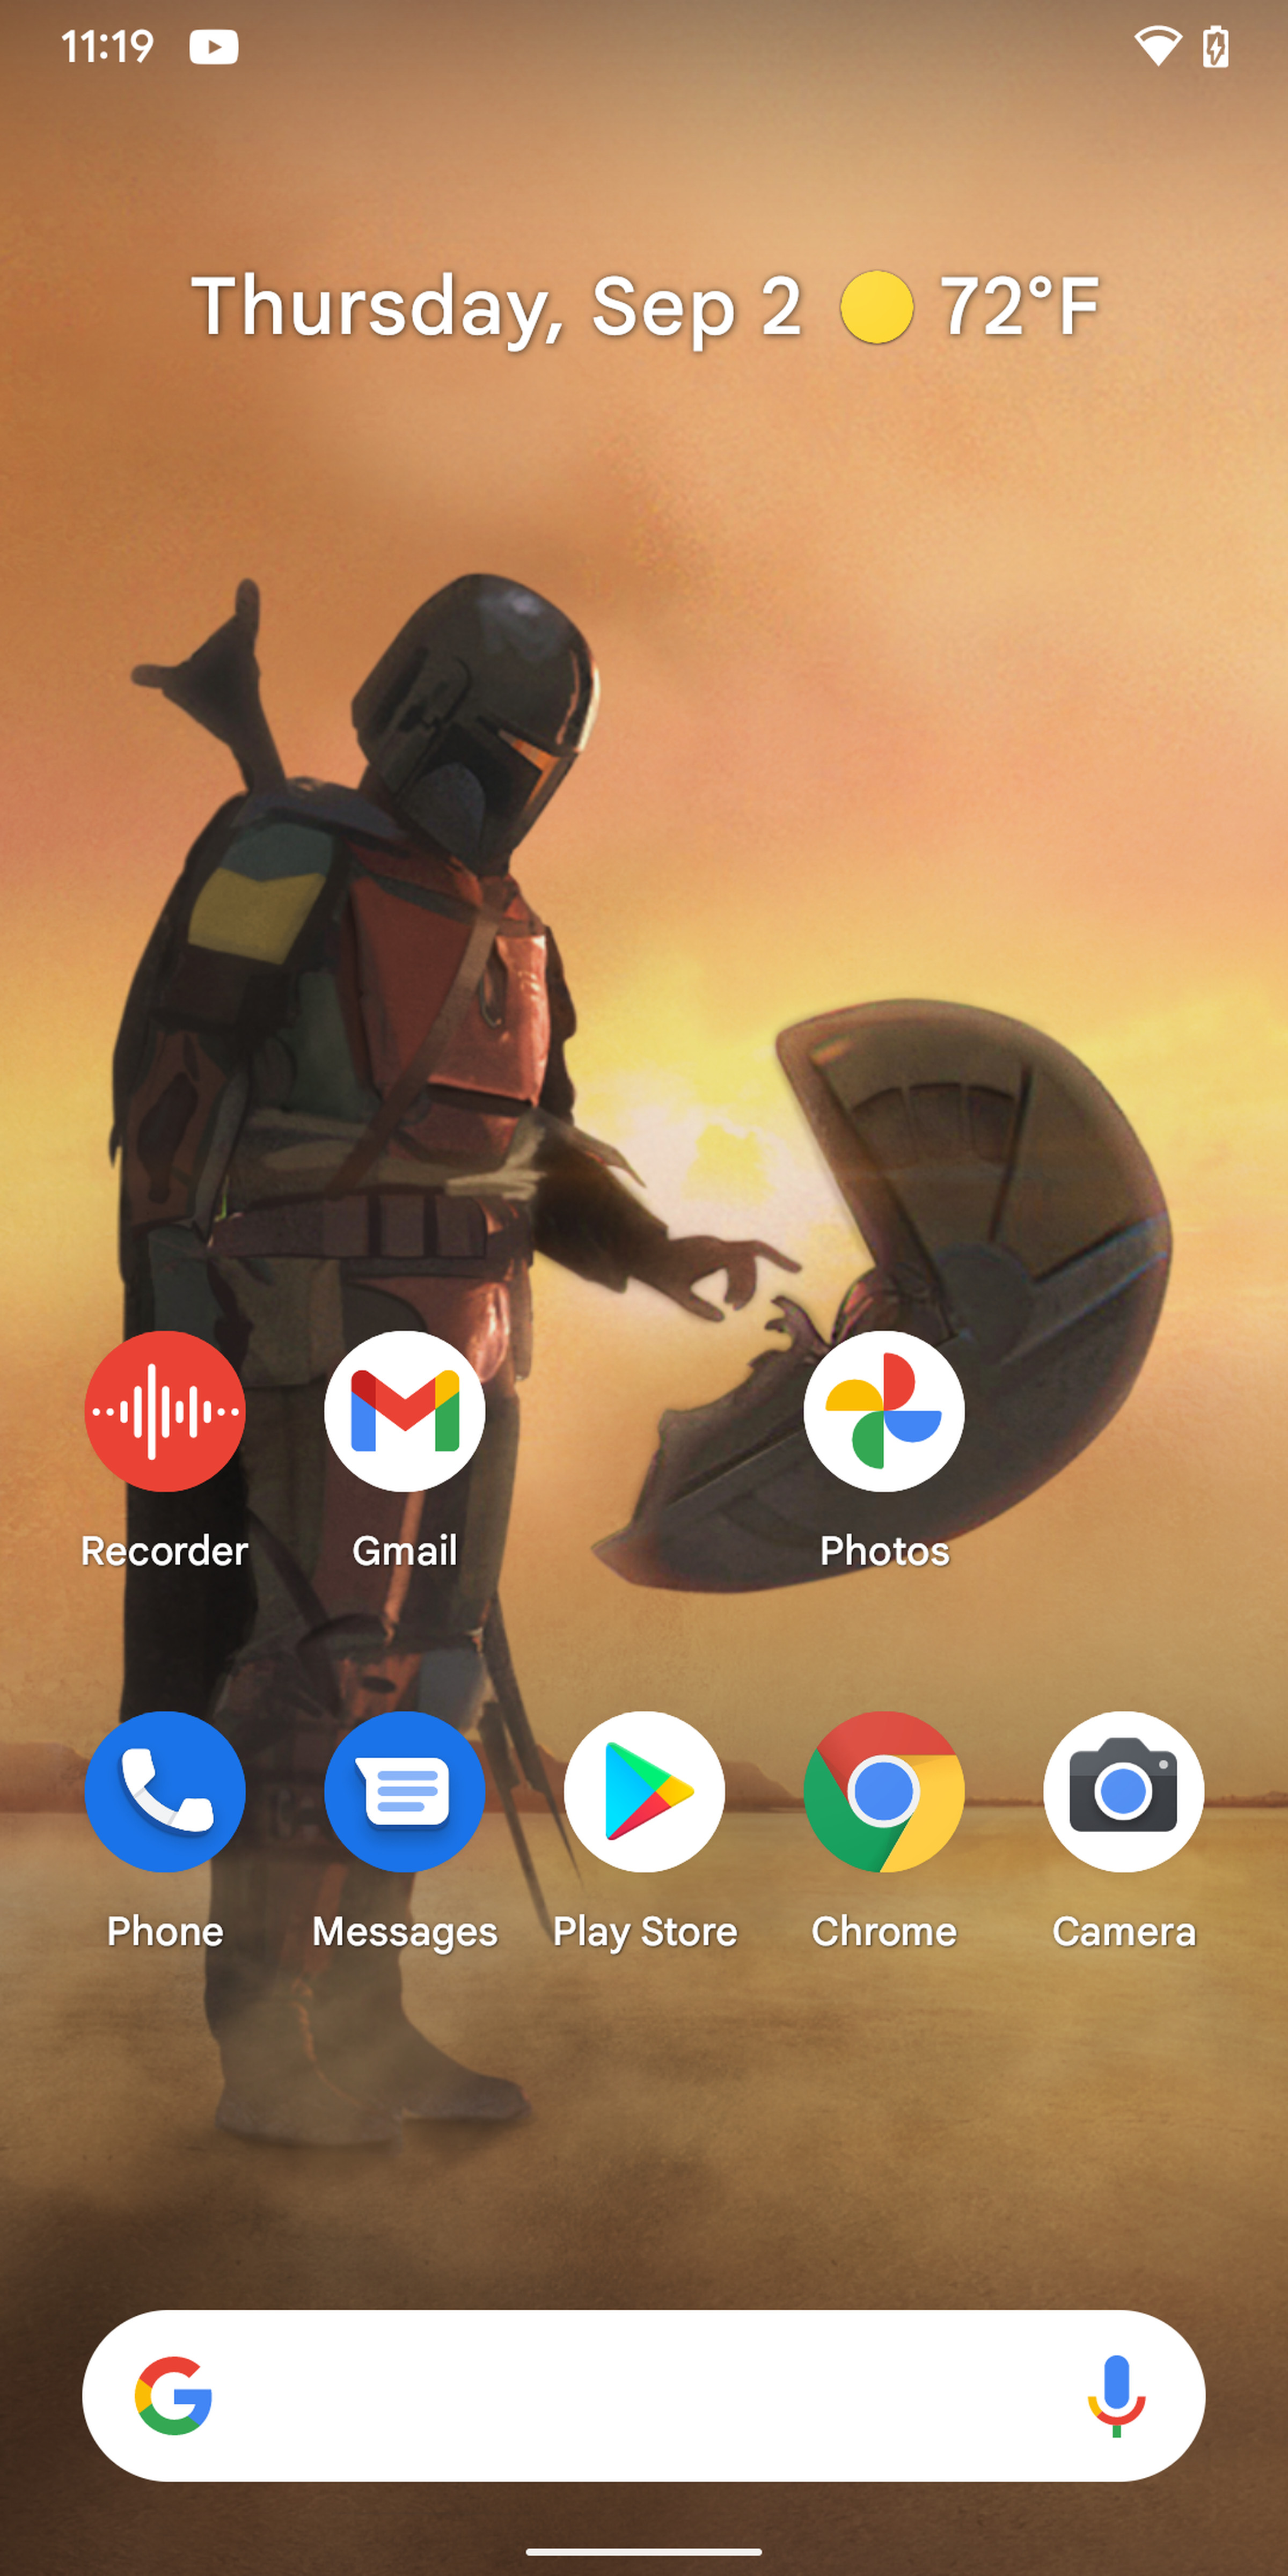 The home screen with normal icons.